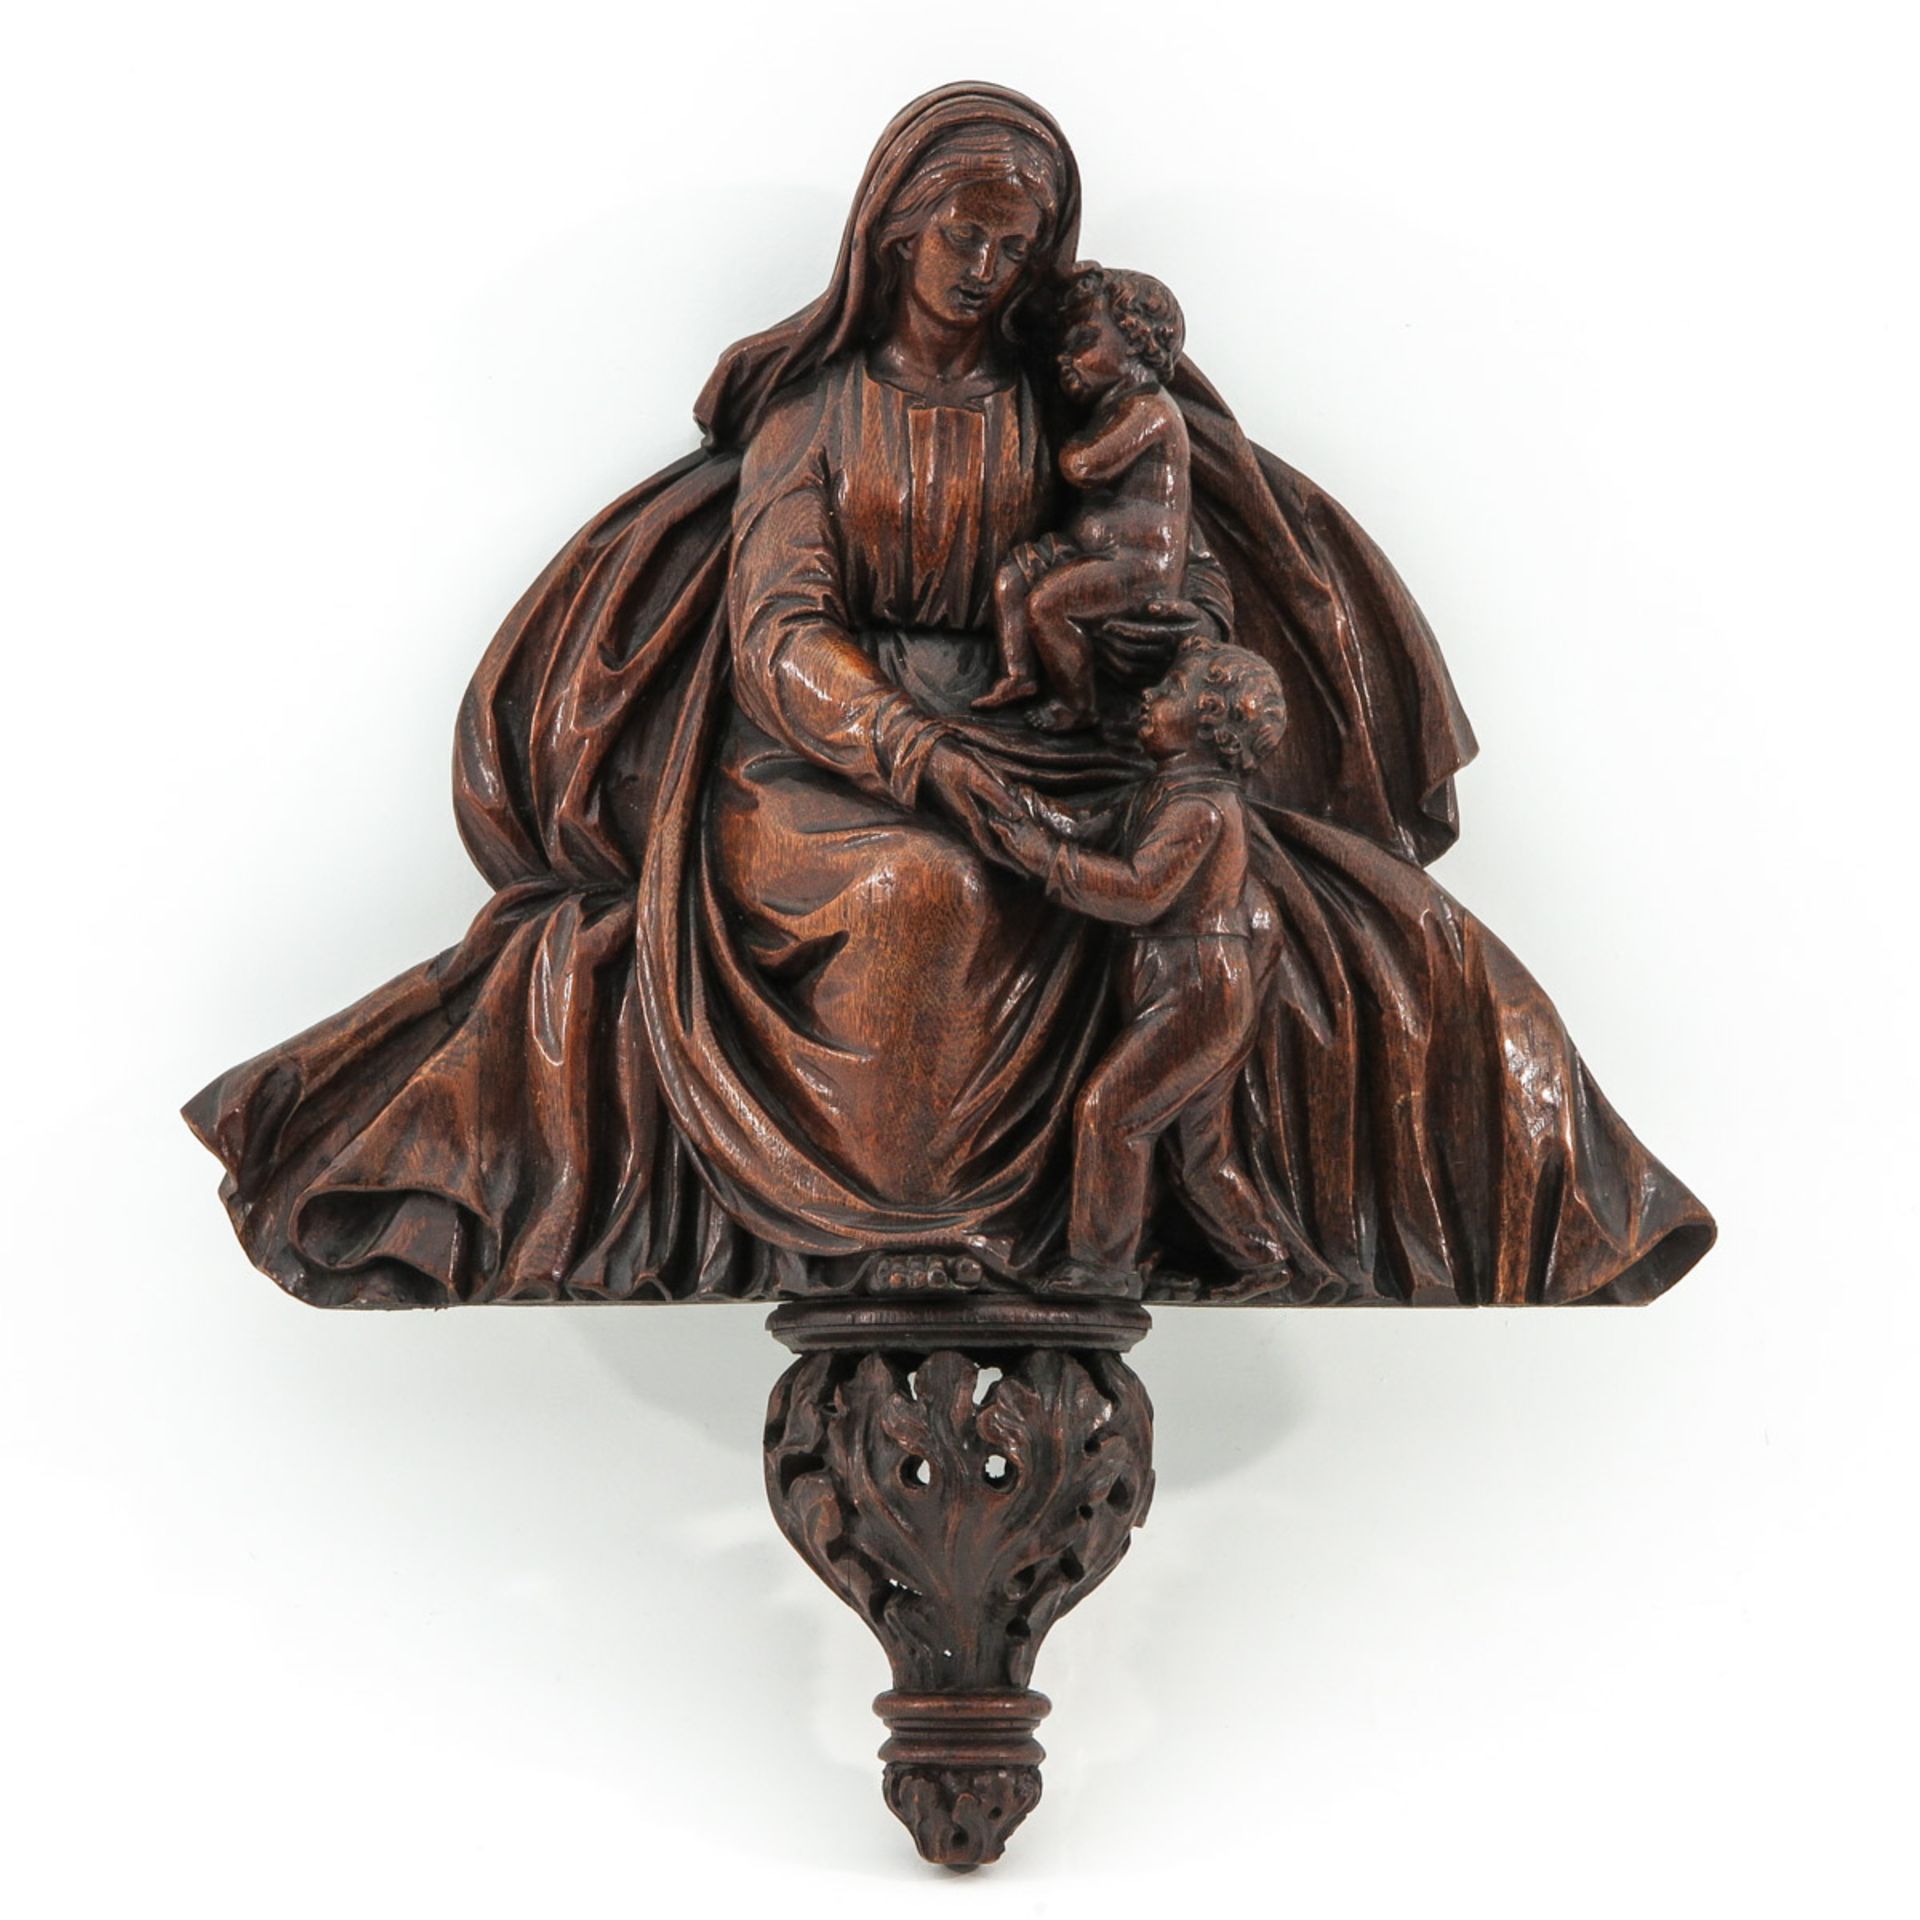 A Carved Wood Sculpture